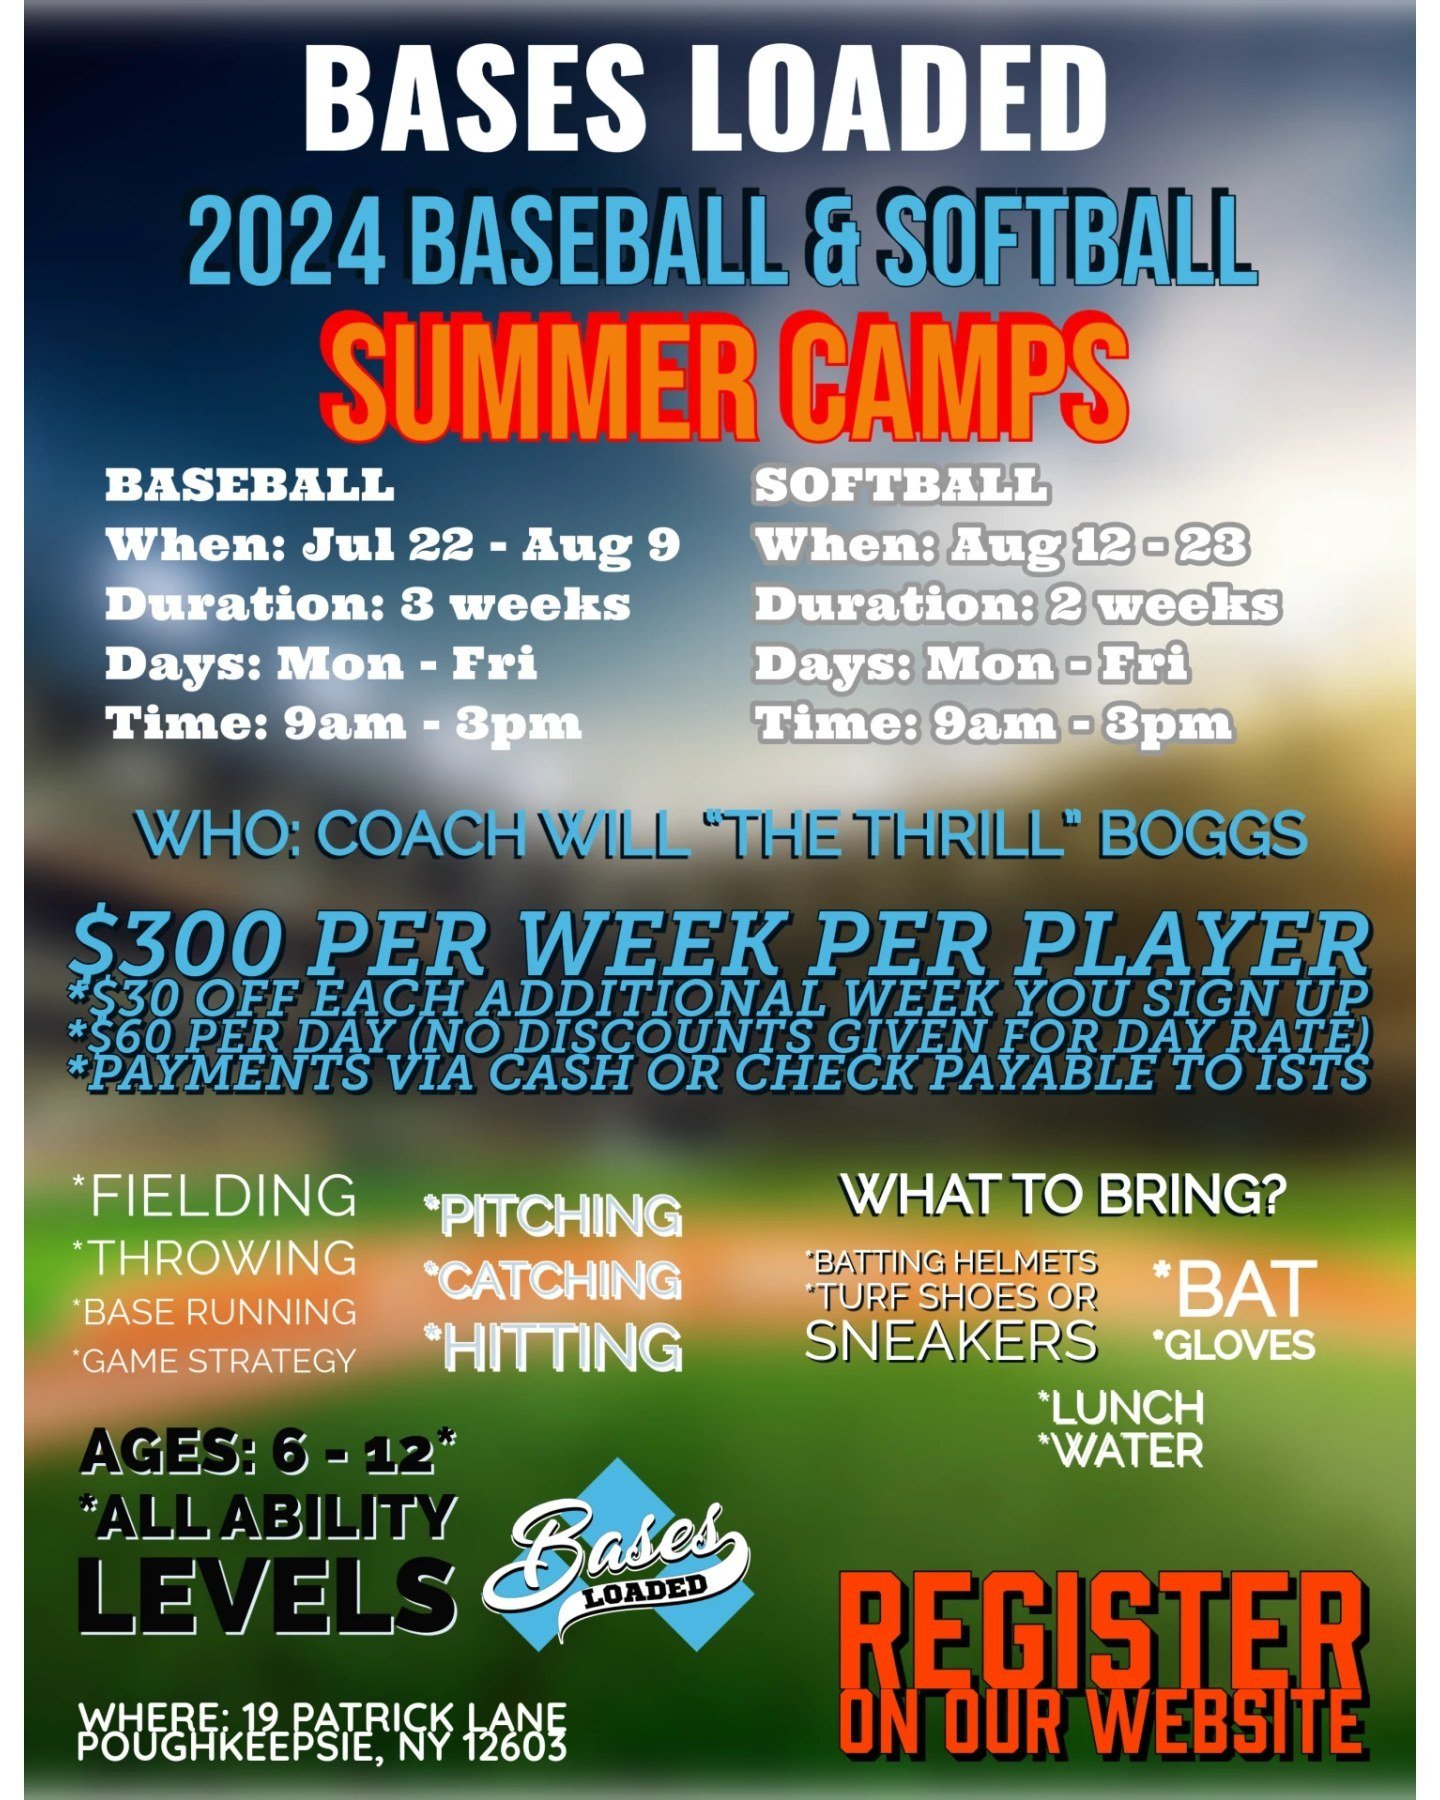 Summer Camp @ Bases Loaded.

Baseball: July 23 - August 9
Softball: August 12 - August 23

All Skill Levels: Ages 6 - 12